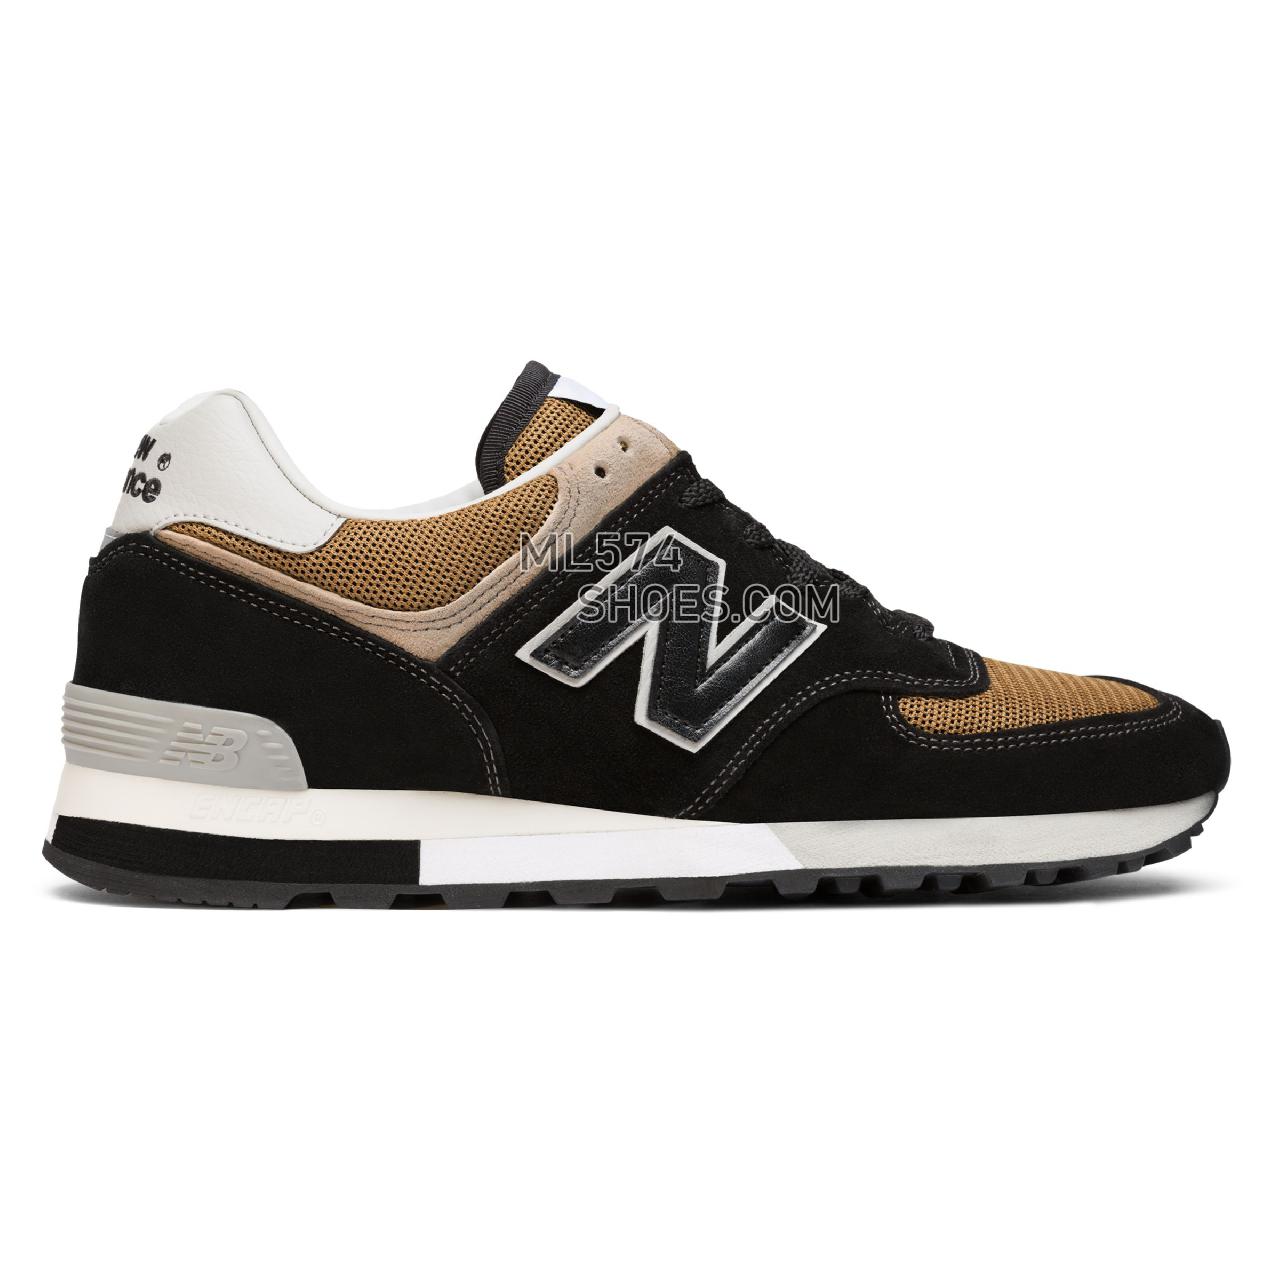 New Balance 576 Made in UK - Men's 576 - Classic Black with Mustard Yellow - OM576OKT